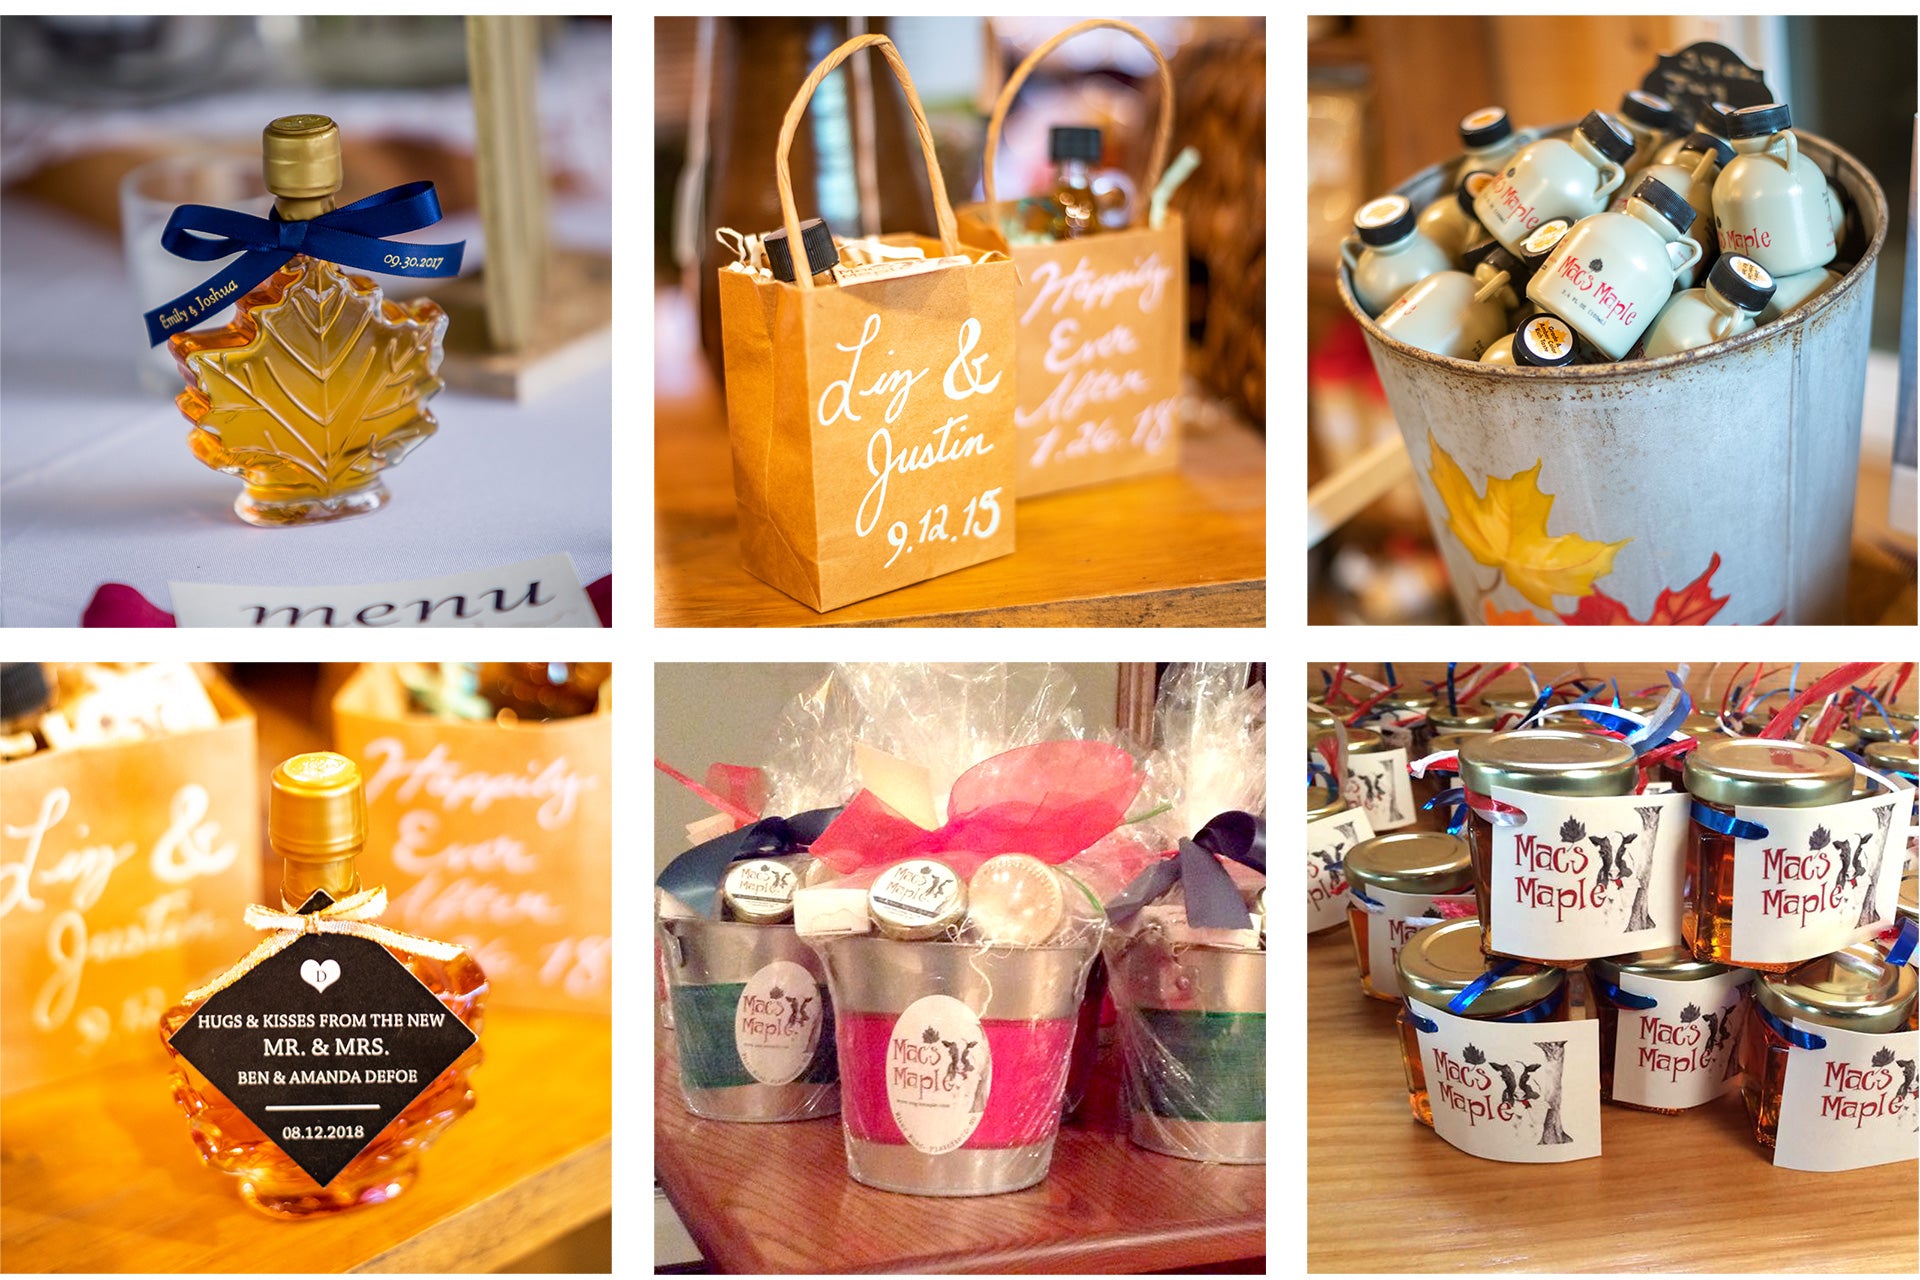 NH Maple Party & Wedding Favors – Mac's Maple